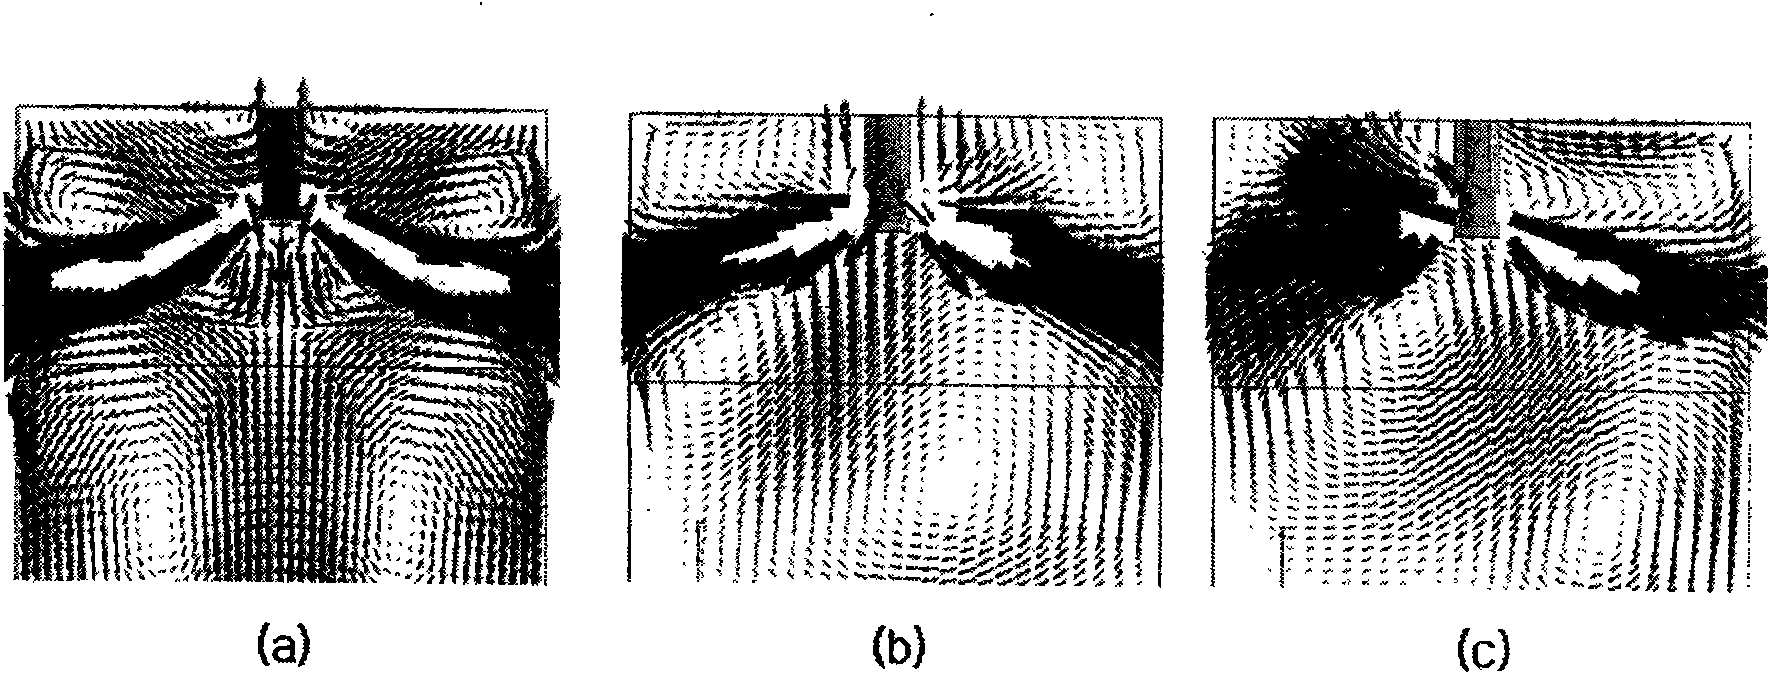 Submerged-entry nozzle centring device